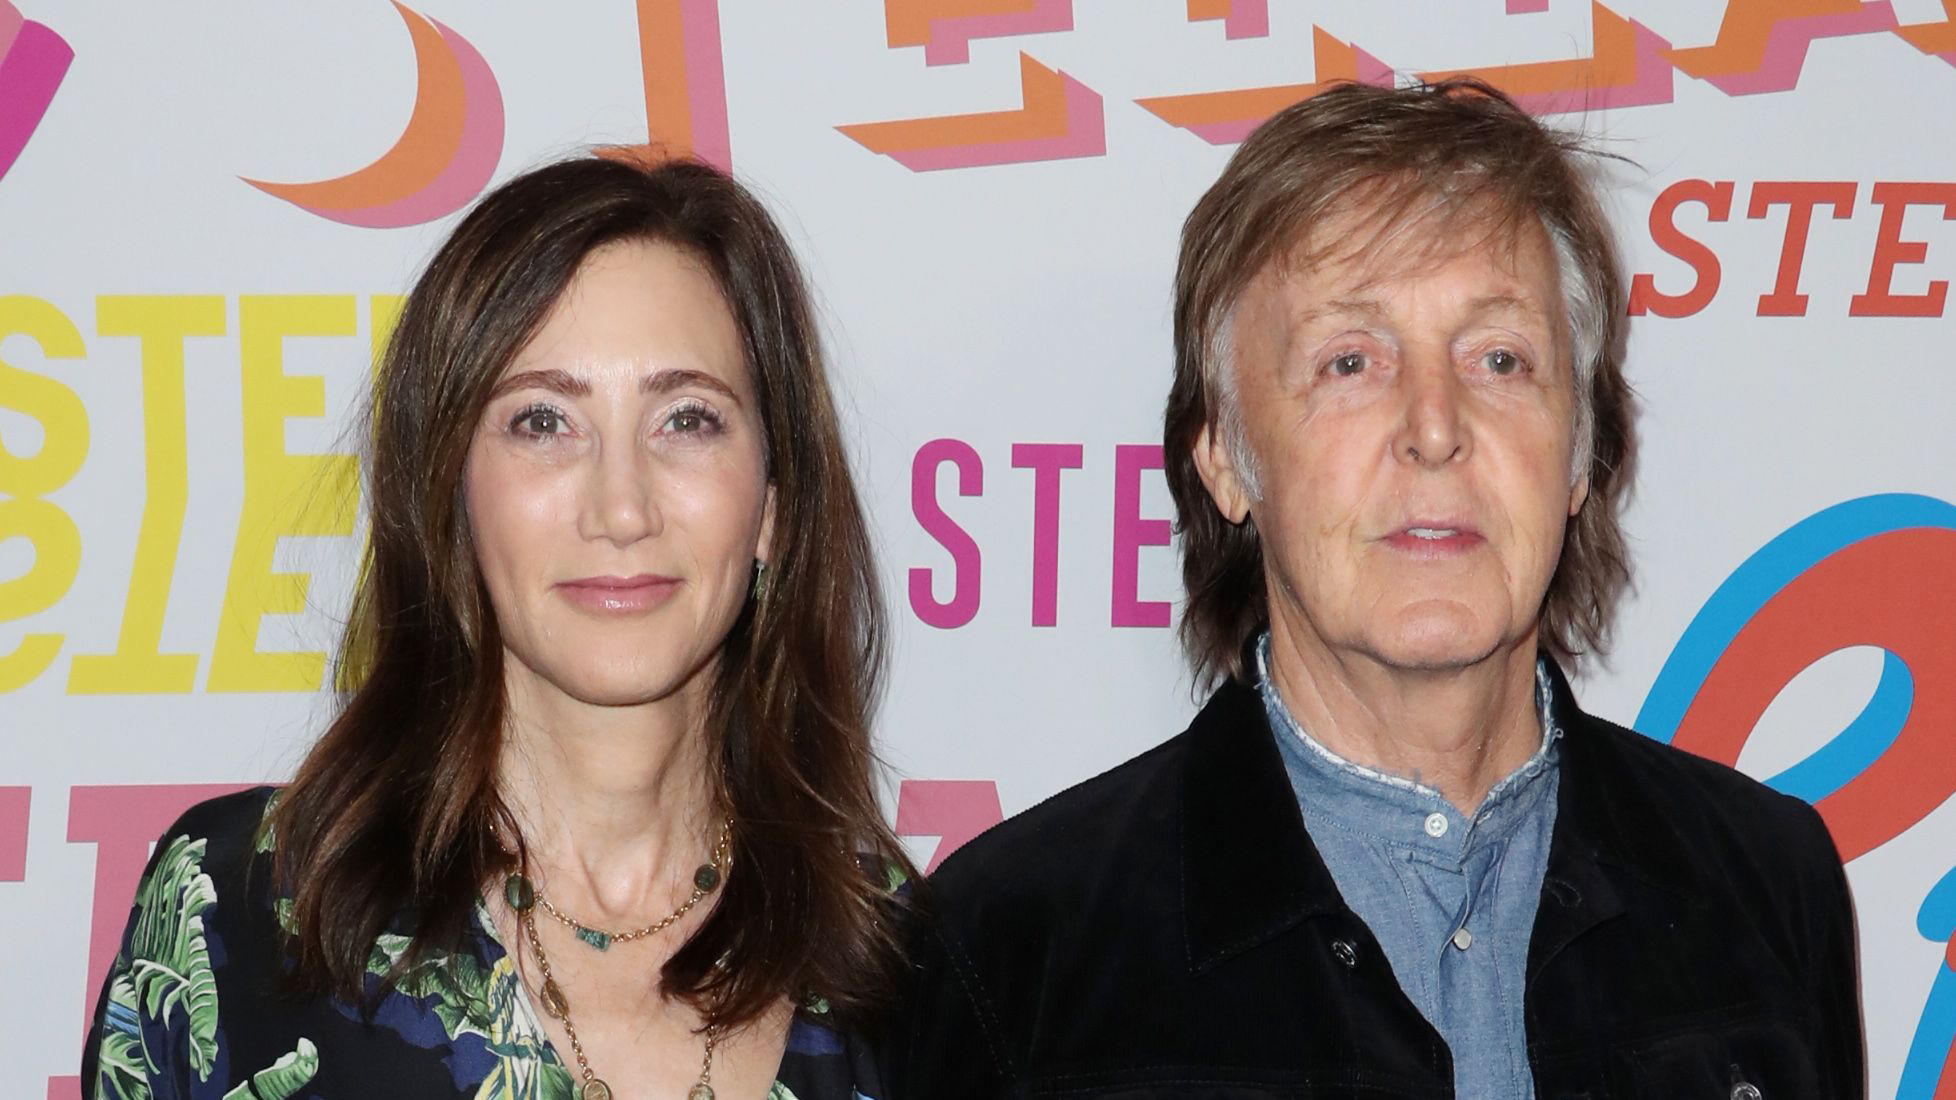 Paul McCartney facts: Beatles singer's age, net worth, wife and children  revealed - Smooth